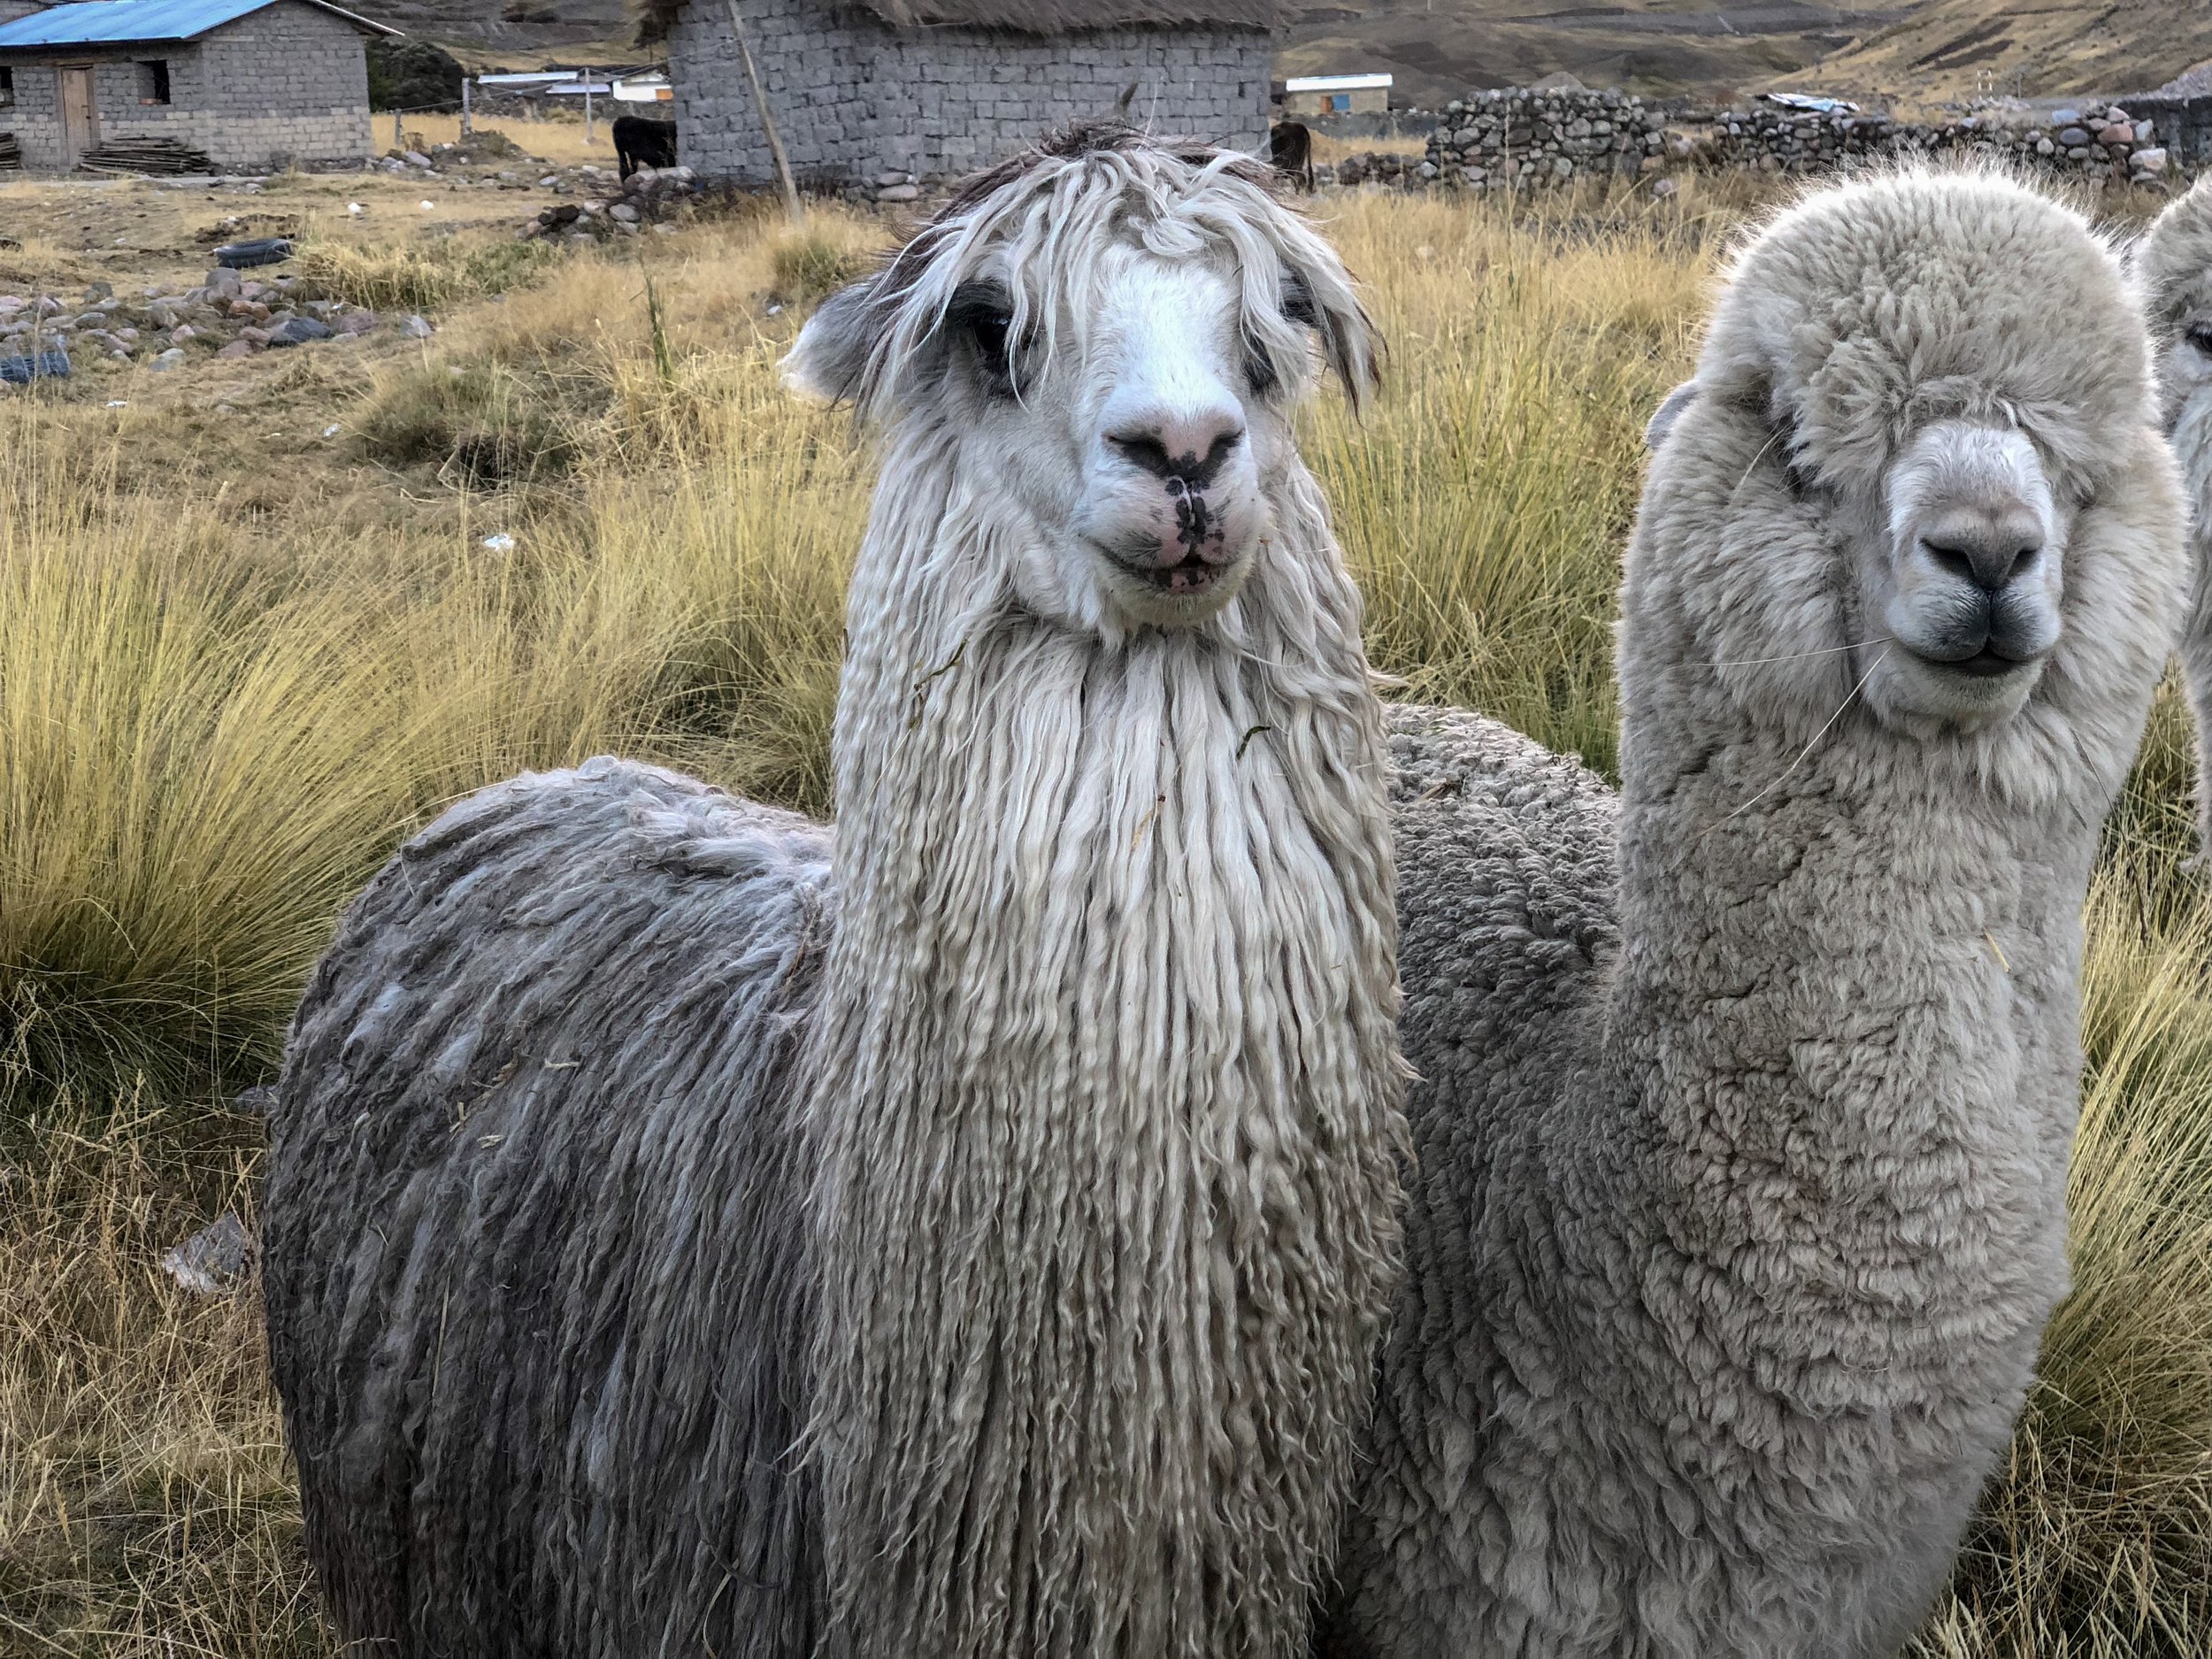 There are two breeds of alpaca; the Suri alpaca&nbsp;and the Huacaya alpaca.